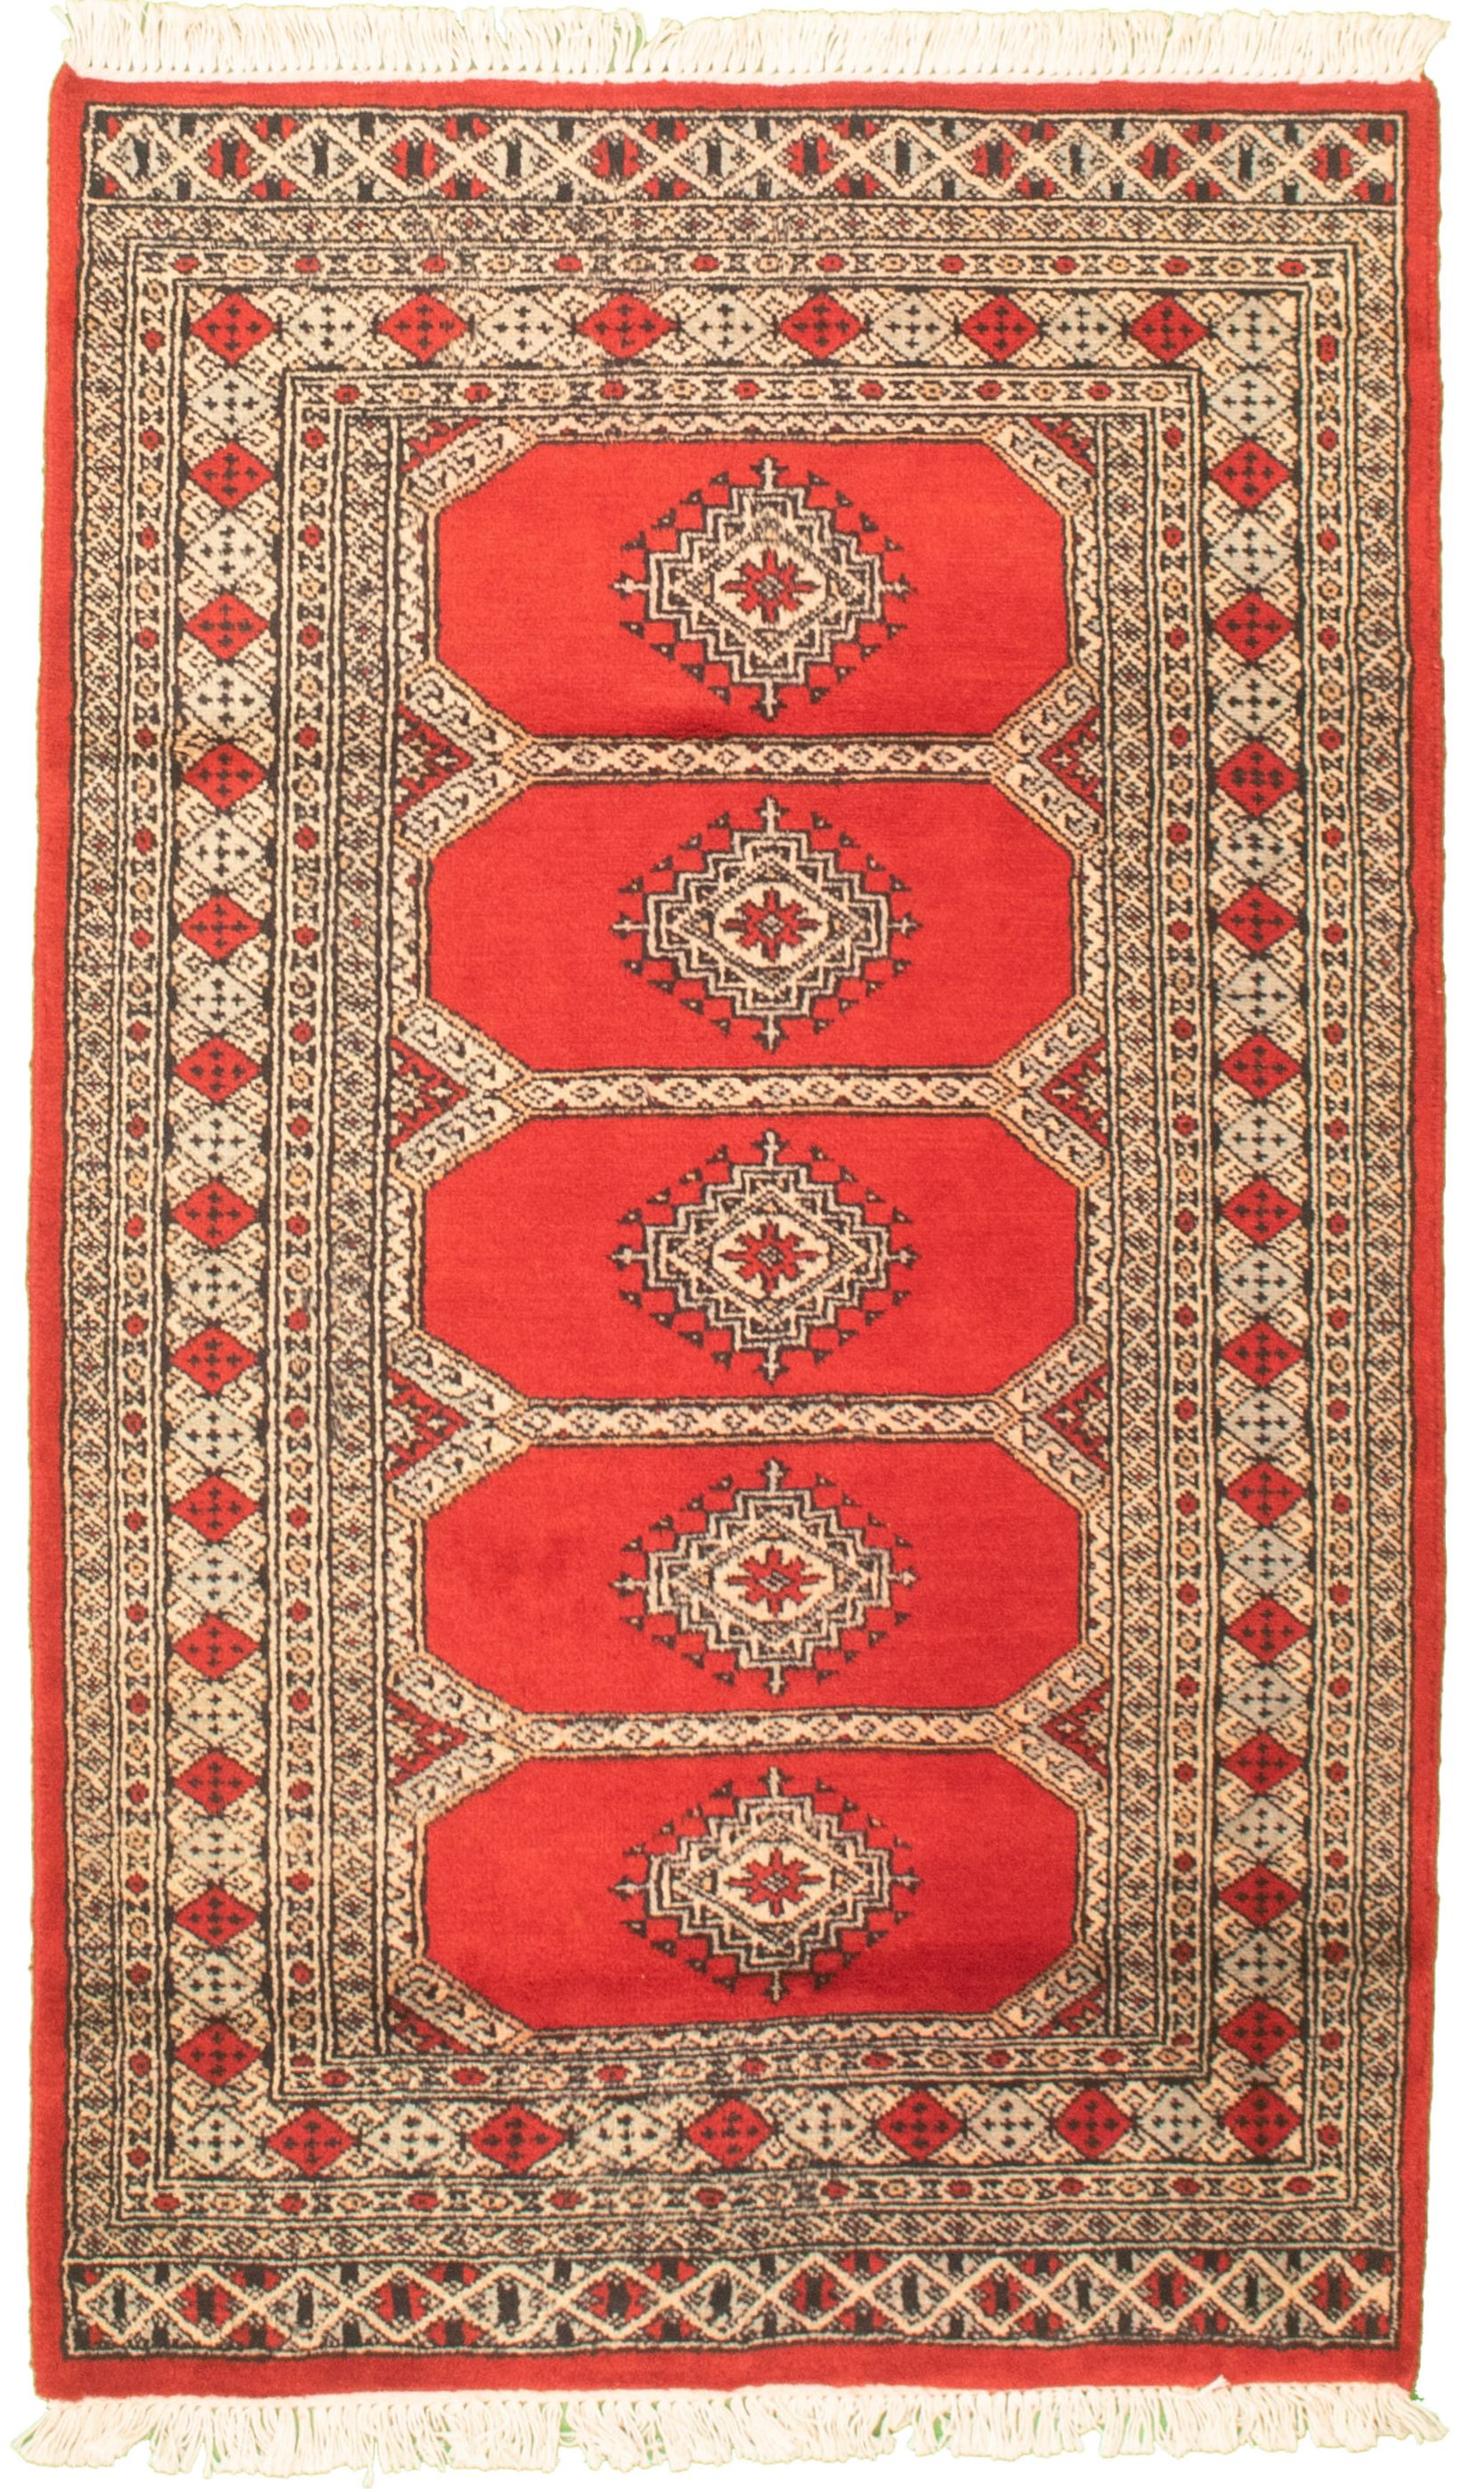 Hand-knotted Finest Peshawar Bokhara Red Wool Rug 3'0" x 5'1"  Size: 3'0" x 5'1"  